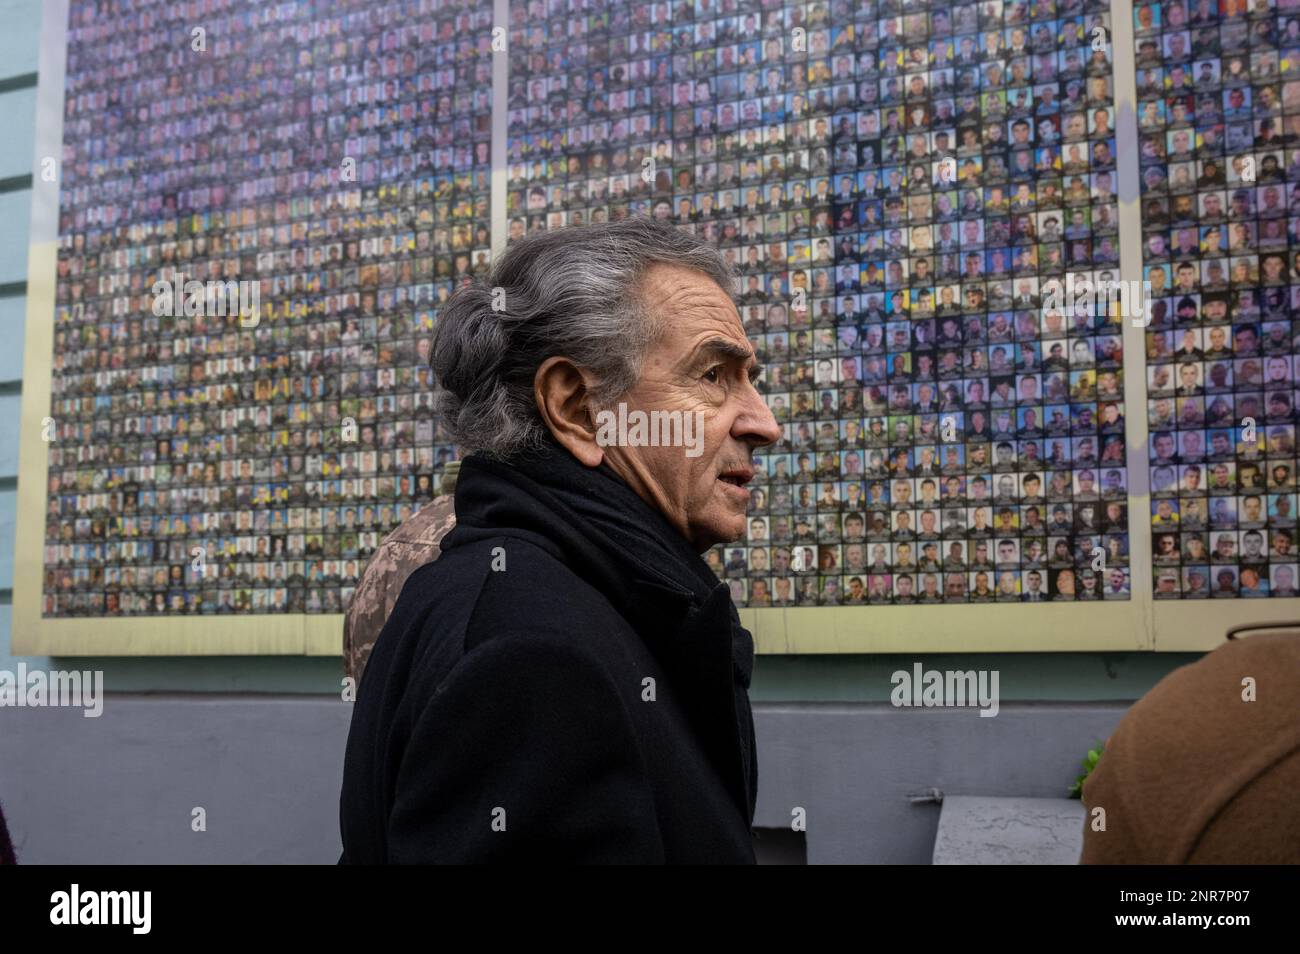 French public intellectual Bernard-Henri Levy (often referred to as BHL, center), looks at photos of Ukrainian army members killed by Russian army since 2014, on the wall of Ukraine’s National Military History Museum, in Kyiv, or Kiev, Ukraine, on February 26, 2023, Photo by Ammar Abd Rabbo/ABACAPRESS.COM Stock Photo